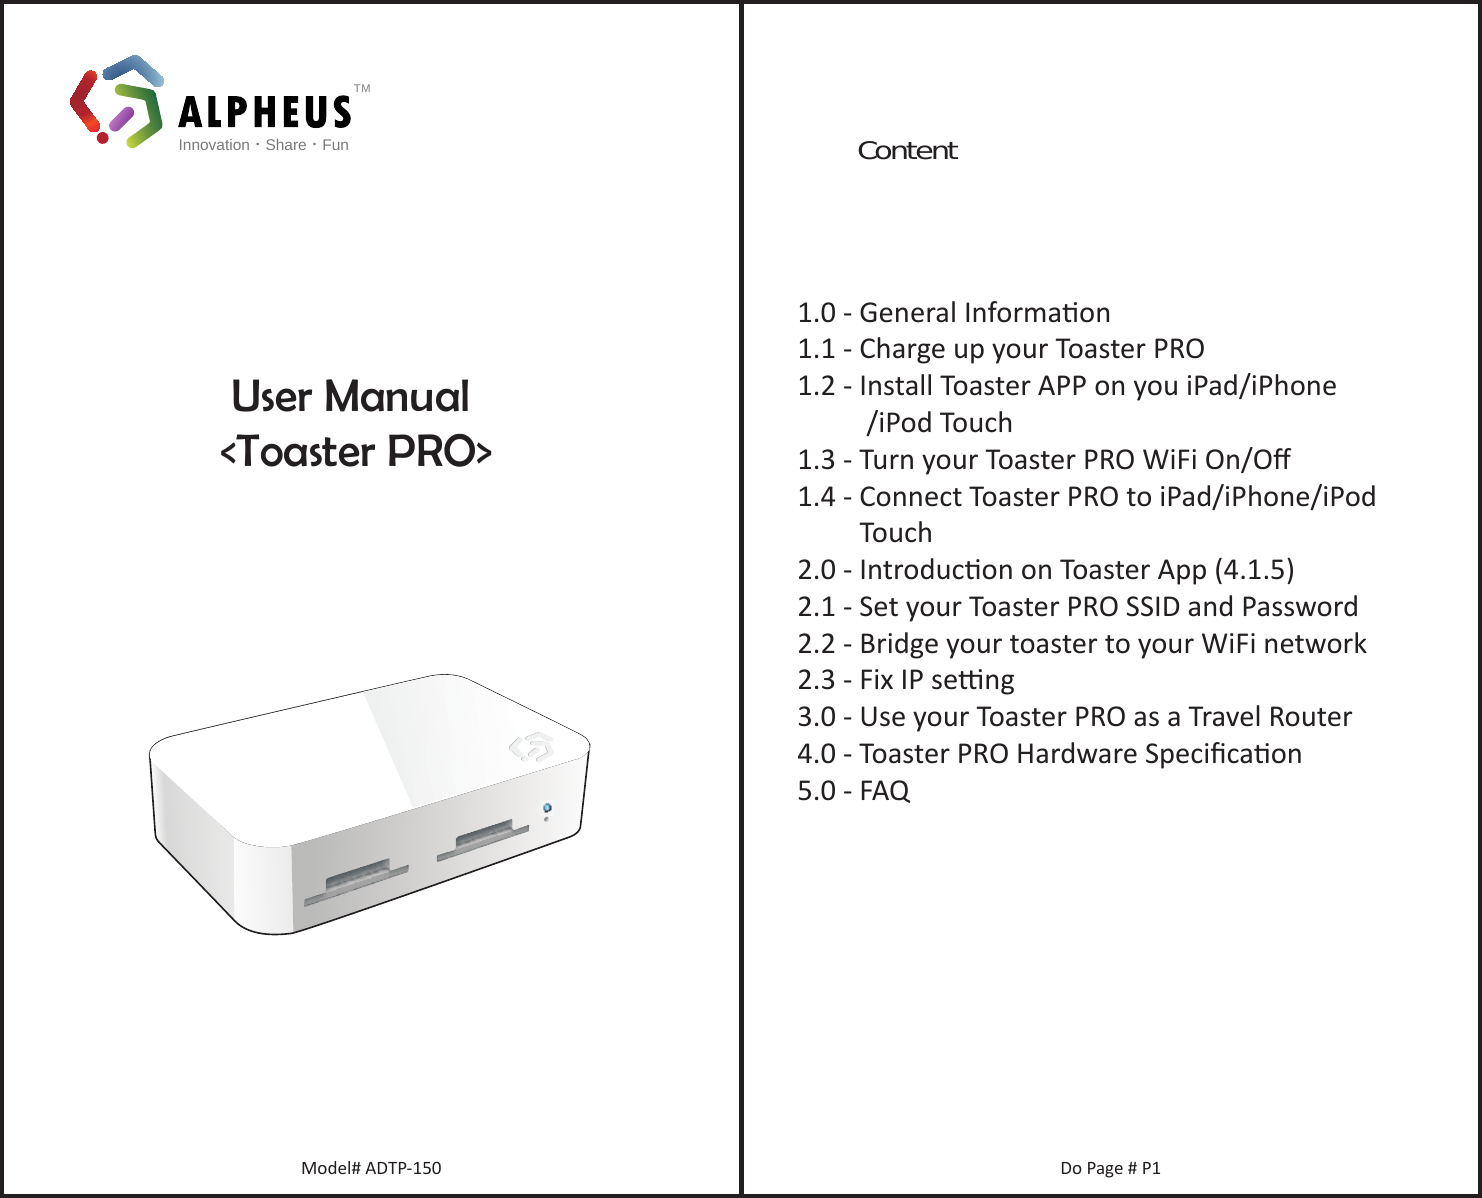 TMInnovation•Share•Fun    User Manual&lt;Toaster PRO&gt;Model# ADTP-150 Do Page # P1Content1.0 - General Informaon1.1 - Charge up your Toaster PRO1.2 - Install Toaster APP on you iPad/iPhone          /iPod Touch1.3 - Turn your Toaster PRO WiFi On/Oﬀ1.4 - Connect Toaster PRO to iPad/iPhone/iPod          Touch2.0 - Introducon on Toaster App (4.1.5) 2.1 - Set your Toaster PRO SSID and Password2.2 - Bridge your toaster to your WiFi network2.3 - Fix IP seng3.0 - Use your Toaster PRO as a Travel Router4.0 - Toaster PRO Hardware Speciﬁcaon5.0 - FAQ